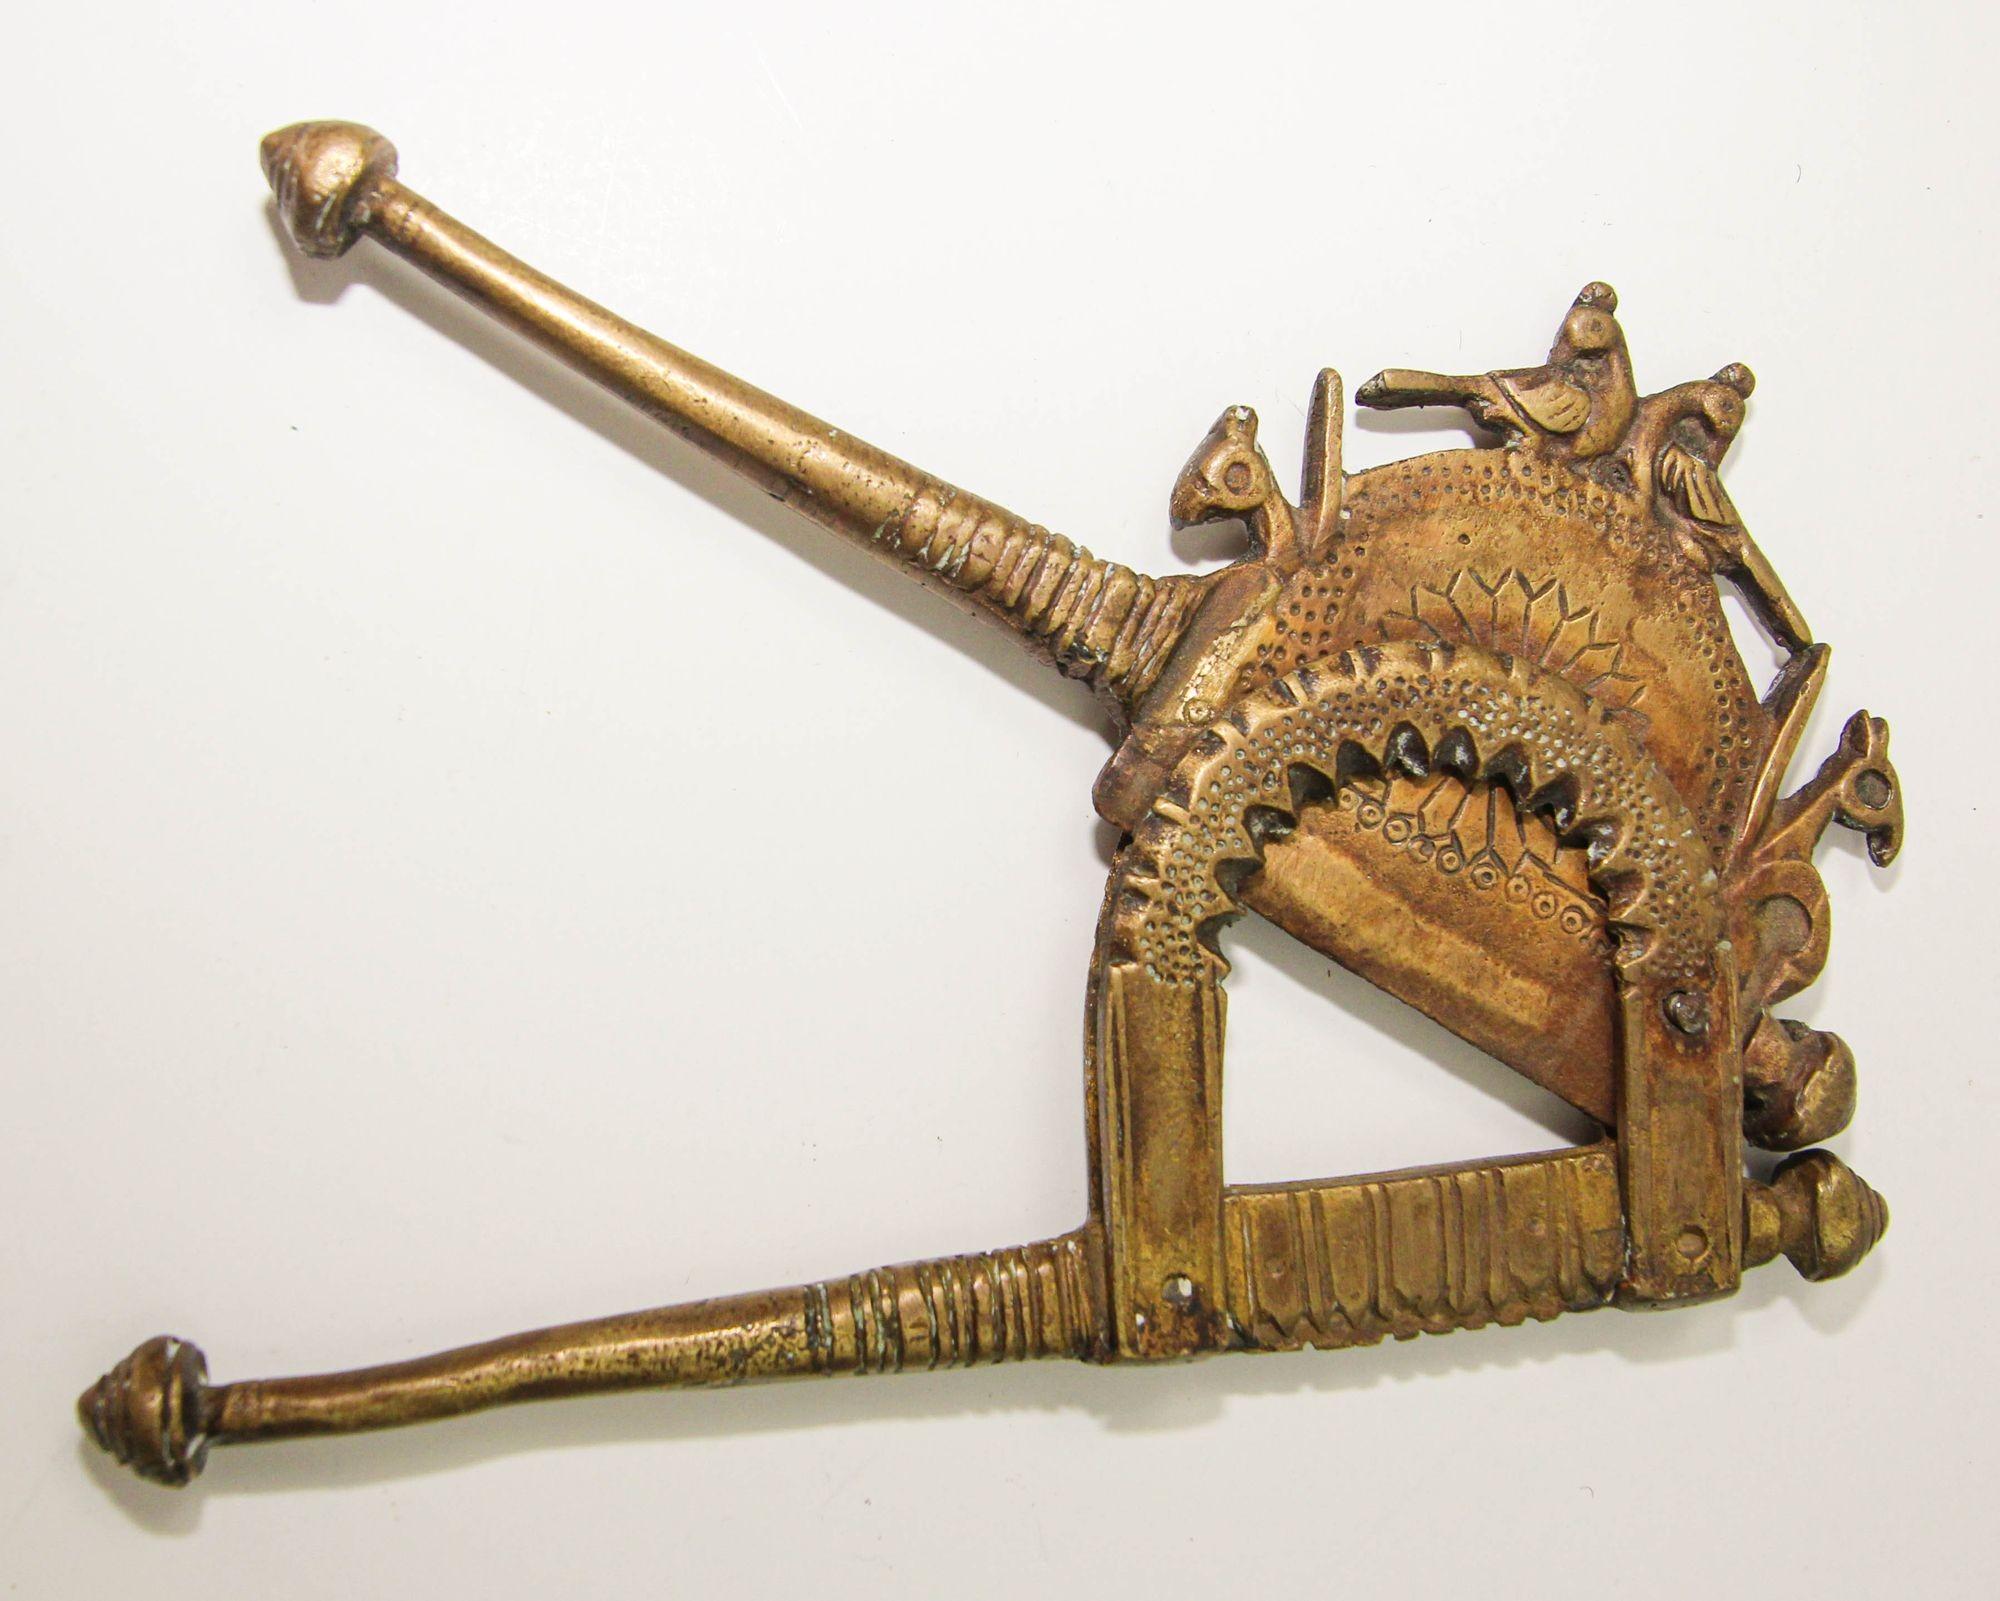 19th Century Antique 19th C. Brass Betel Nut Cutter from India Collectible Asian Artifact For Sale